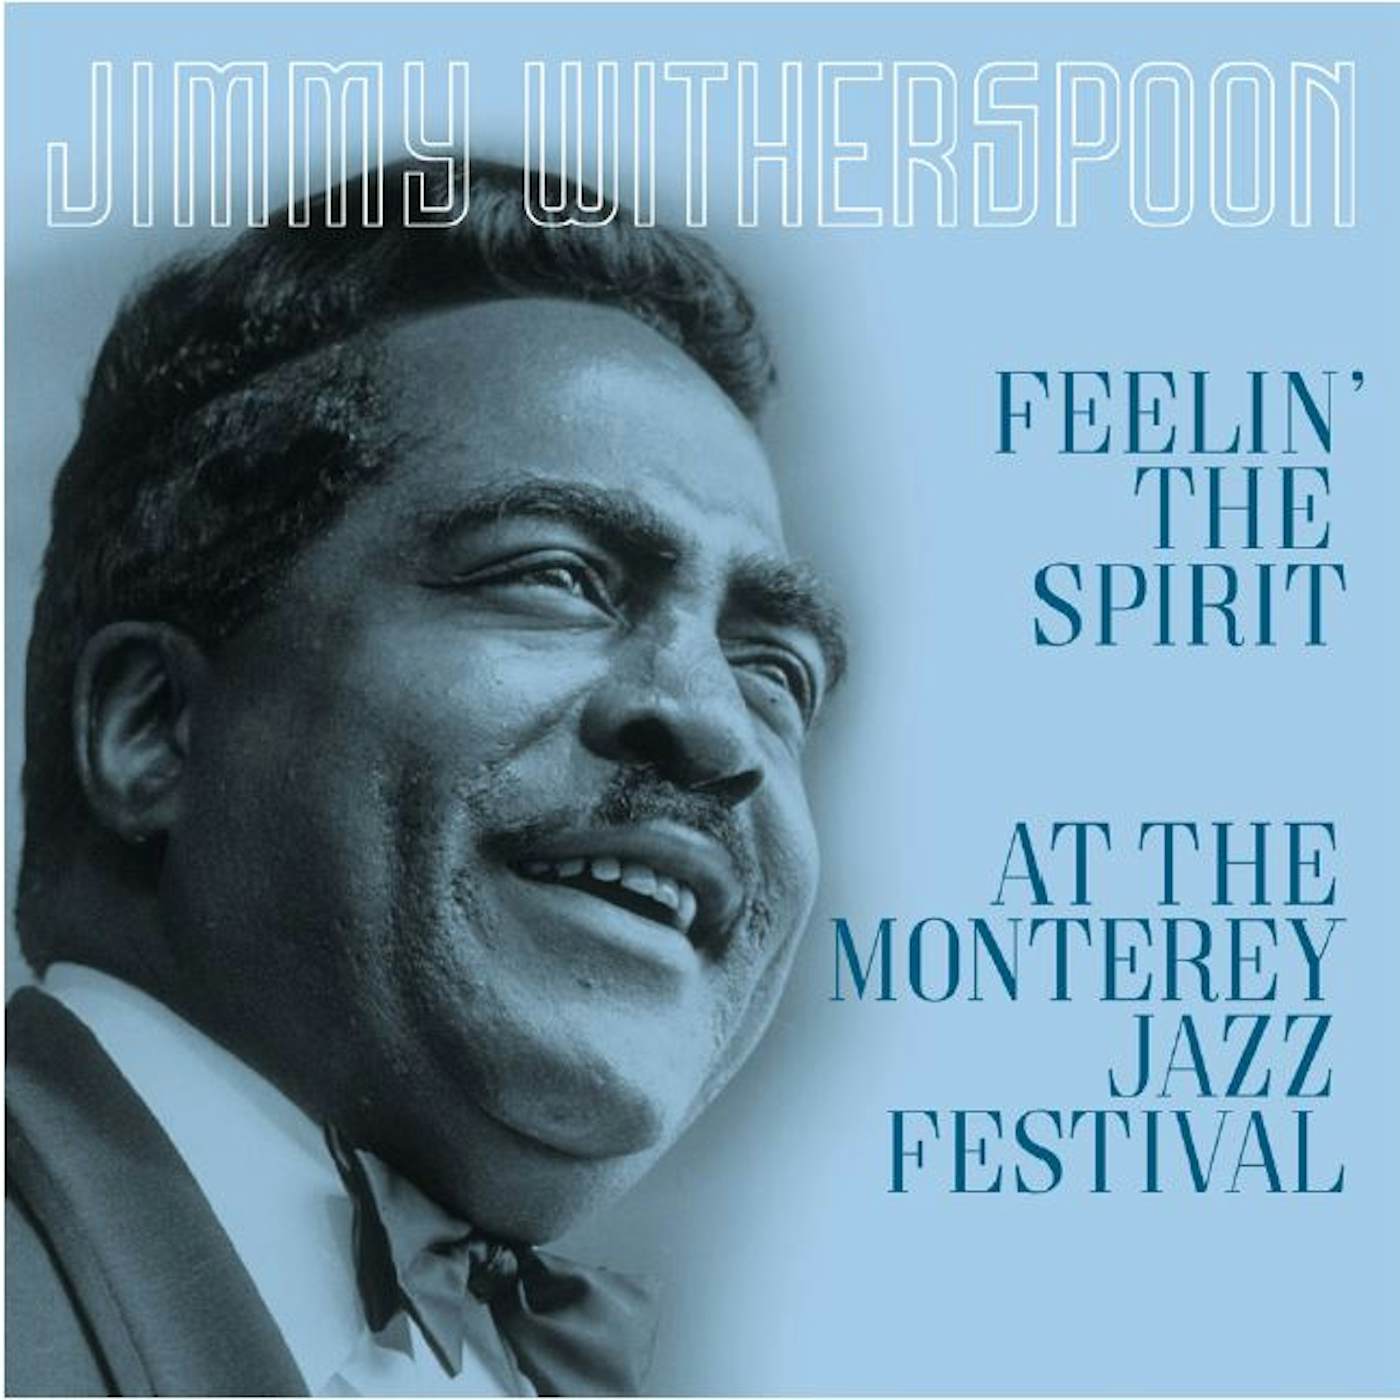 Jimmy Witherspoon FEELIN THE SPIRIT / AT THE MONTEREY JAZZ FESTIVAL Vinyl Record